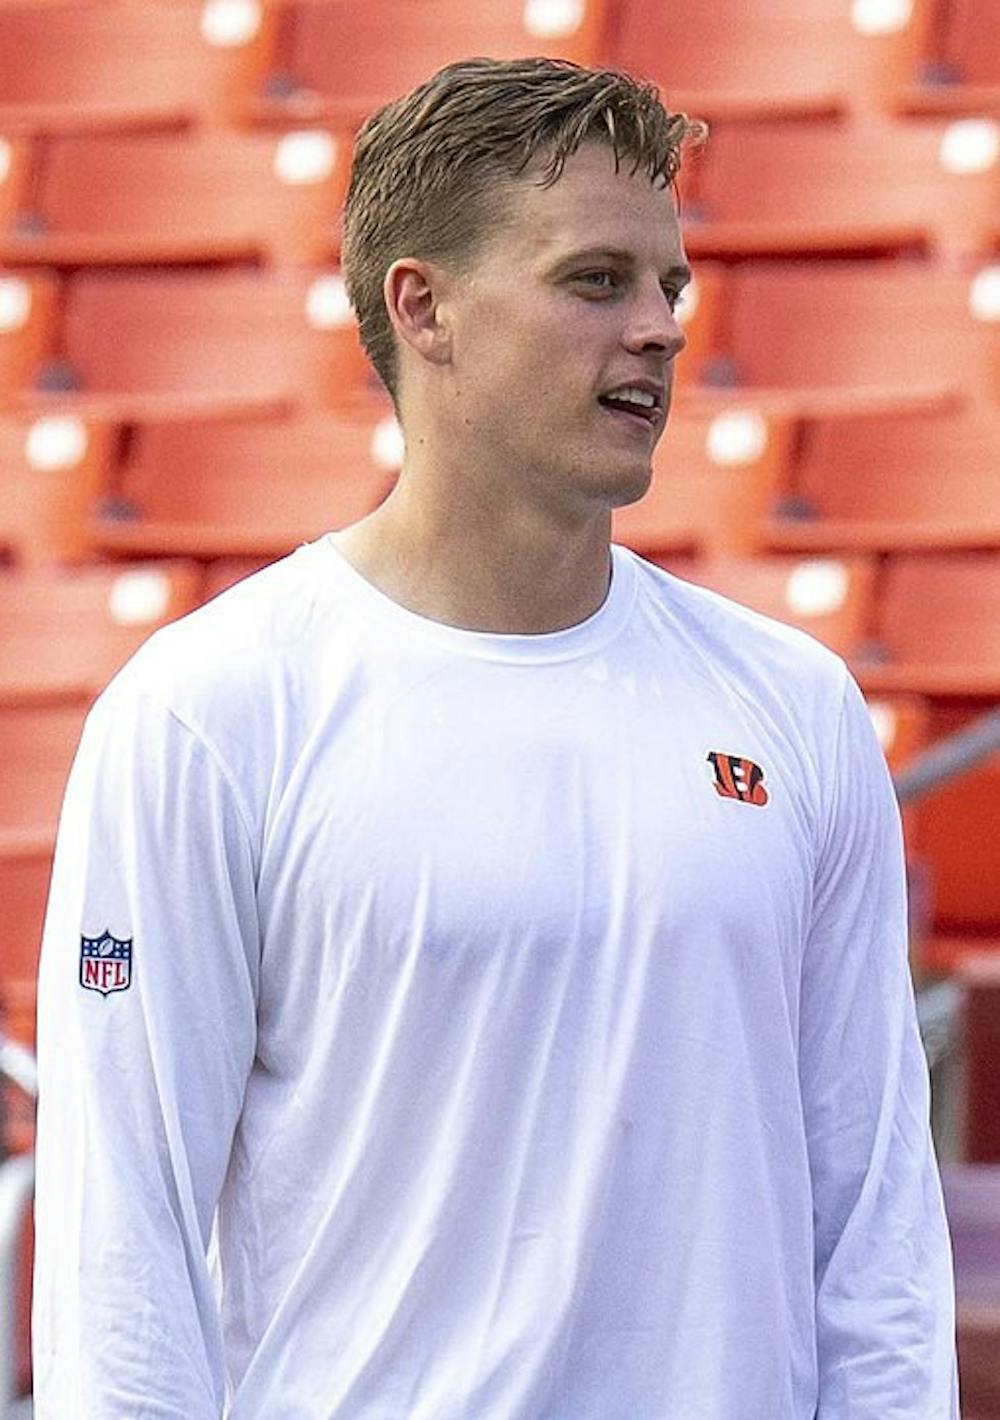 <p>Cincinnati Bengals QB Joe Burrow (Photo courtesy of All-Pro Reels / <a href="https://commons.wikimedia.org/w/index.php?curid=109185949" target="_blank">Wikipedia Commons</a>).</p>